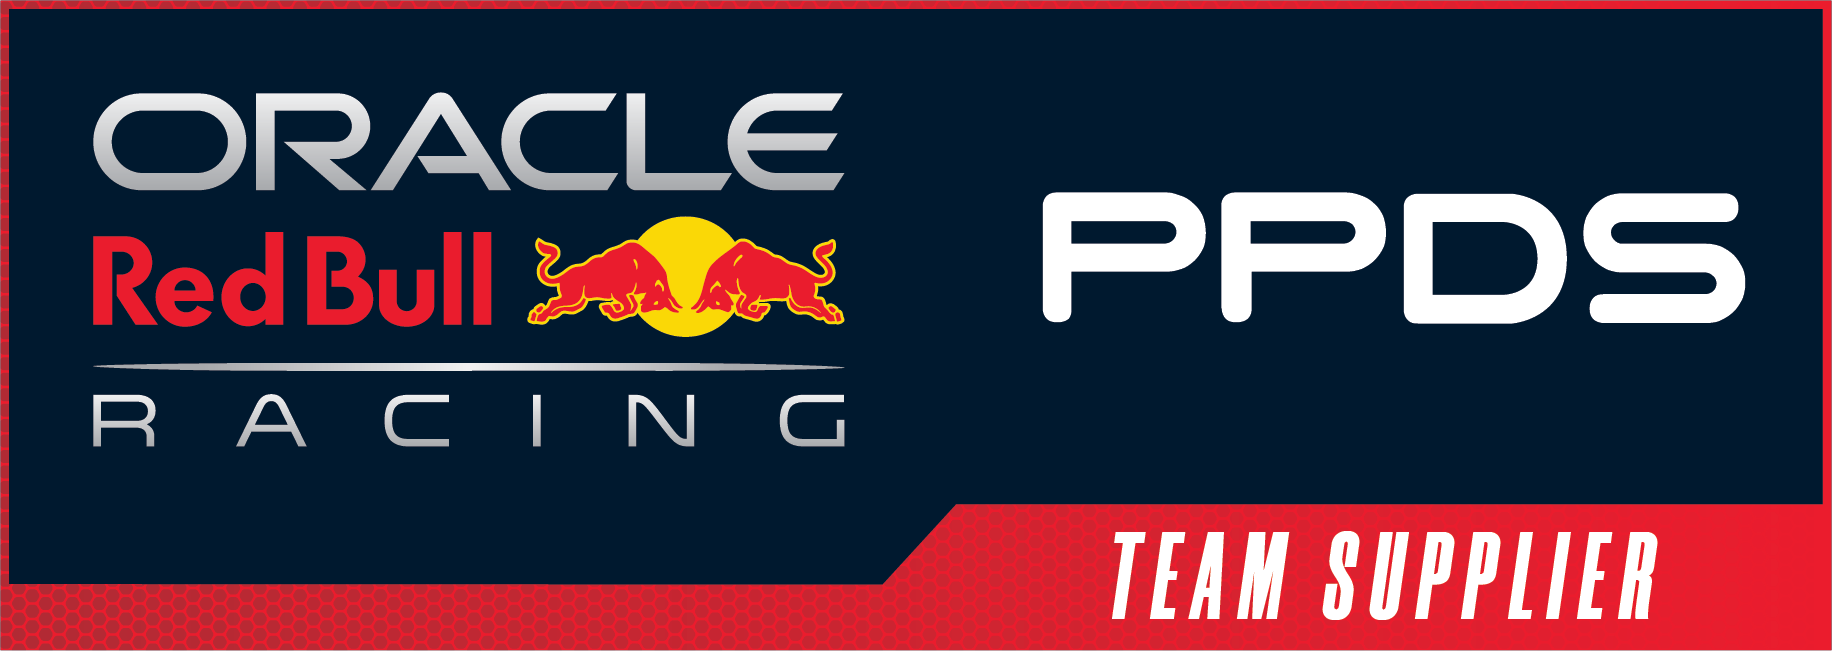 Oracle Red Bull Racing PPDS Team Supplier